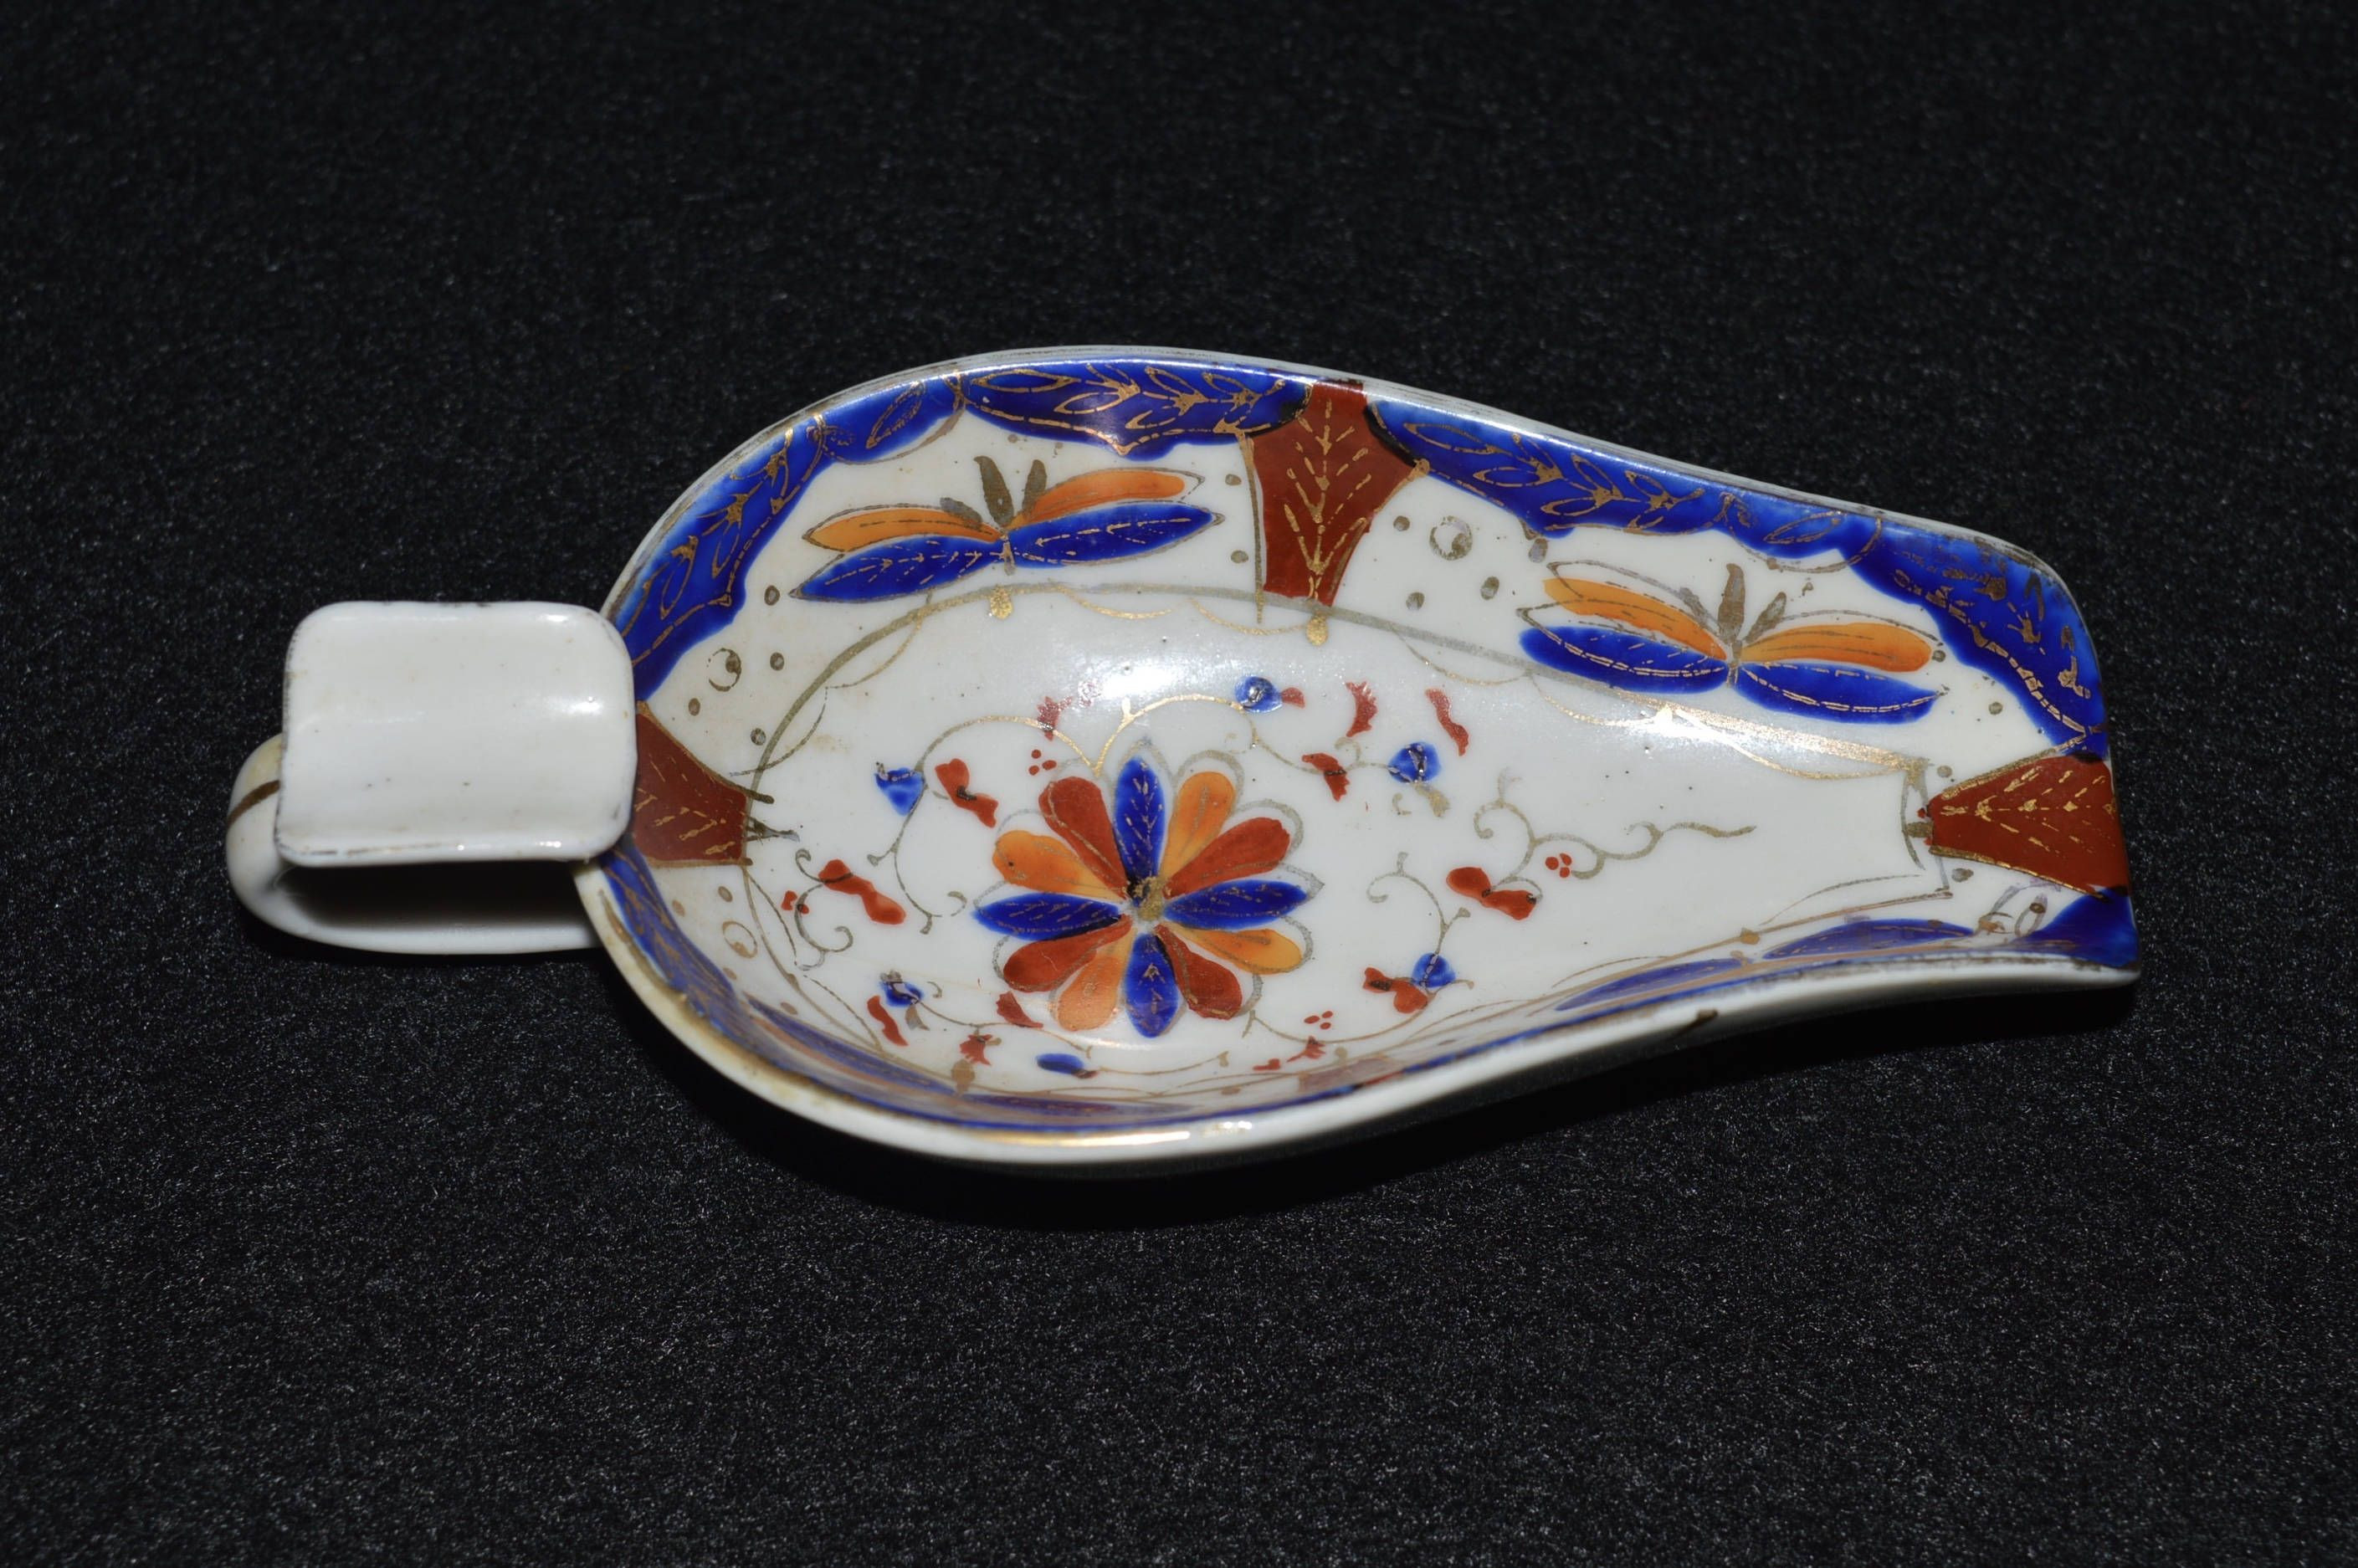 gold imari hand painted vase of vintage imari ashtray pipe rest hand painted porcelain ashtray made throughout vintage imari ashtray pipe holder hand painted porcelain ashtray made in japan imari type ware ashtray with handle beautiful colors by